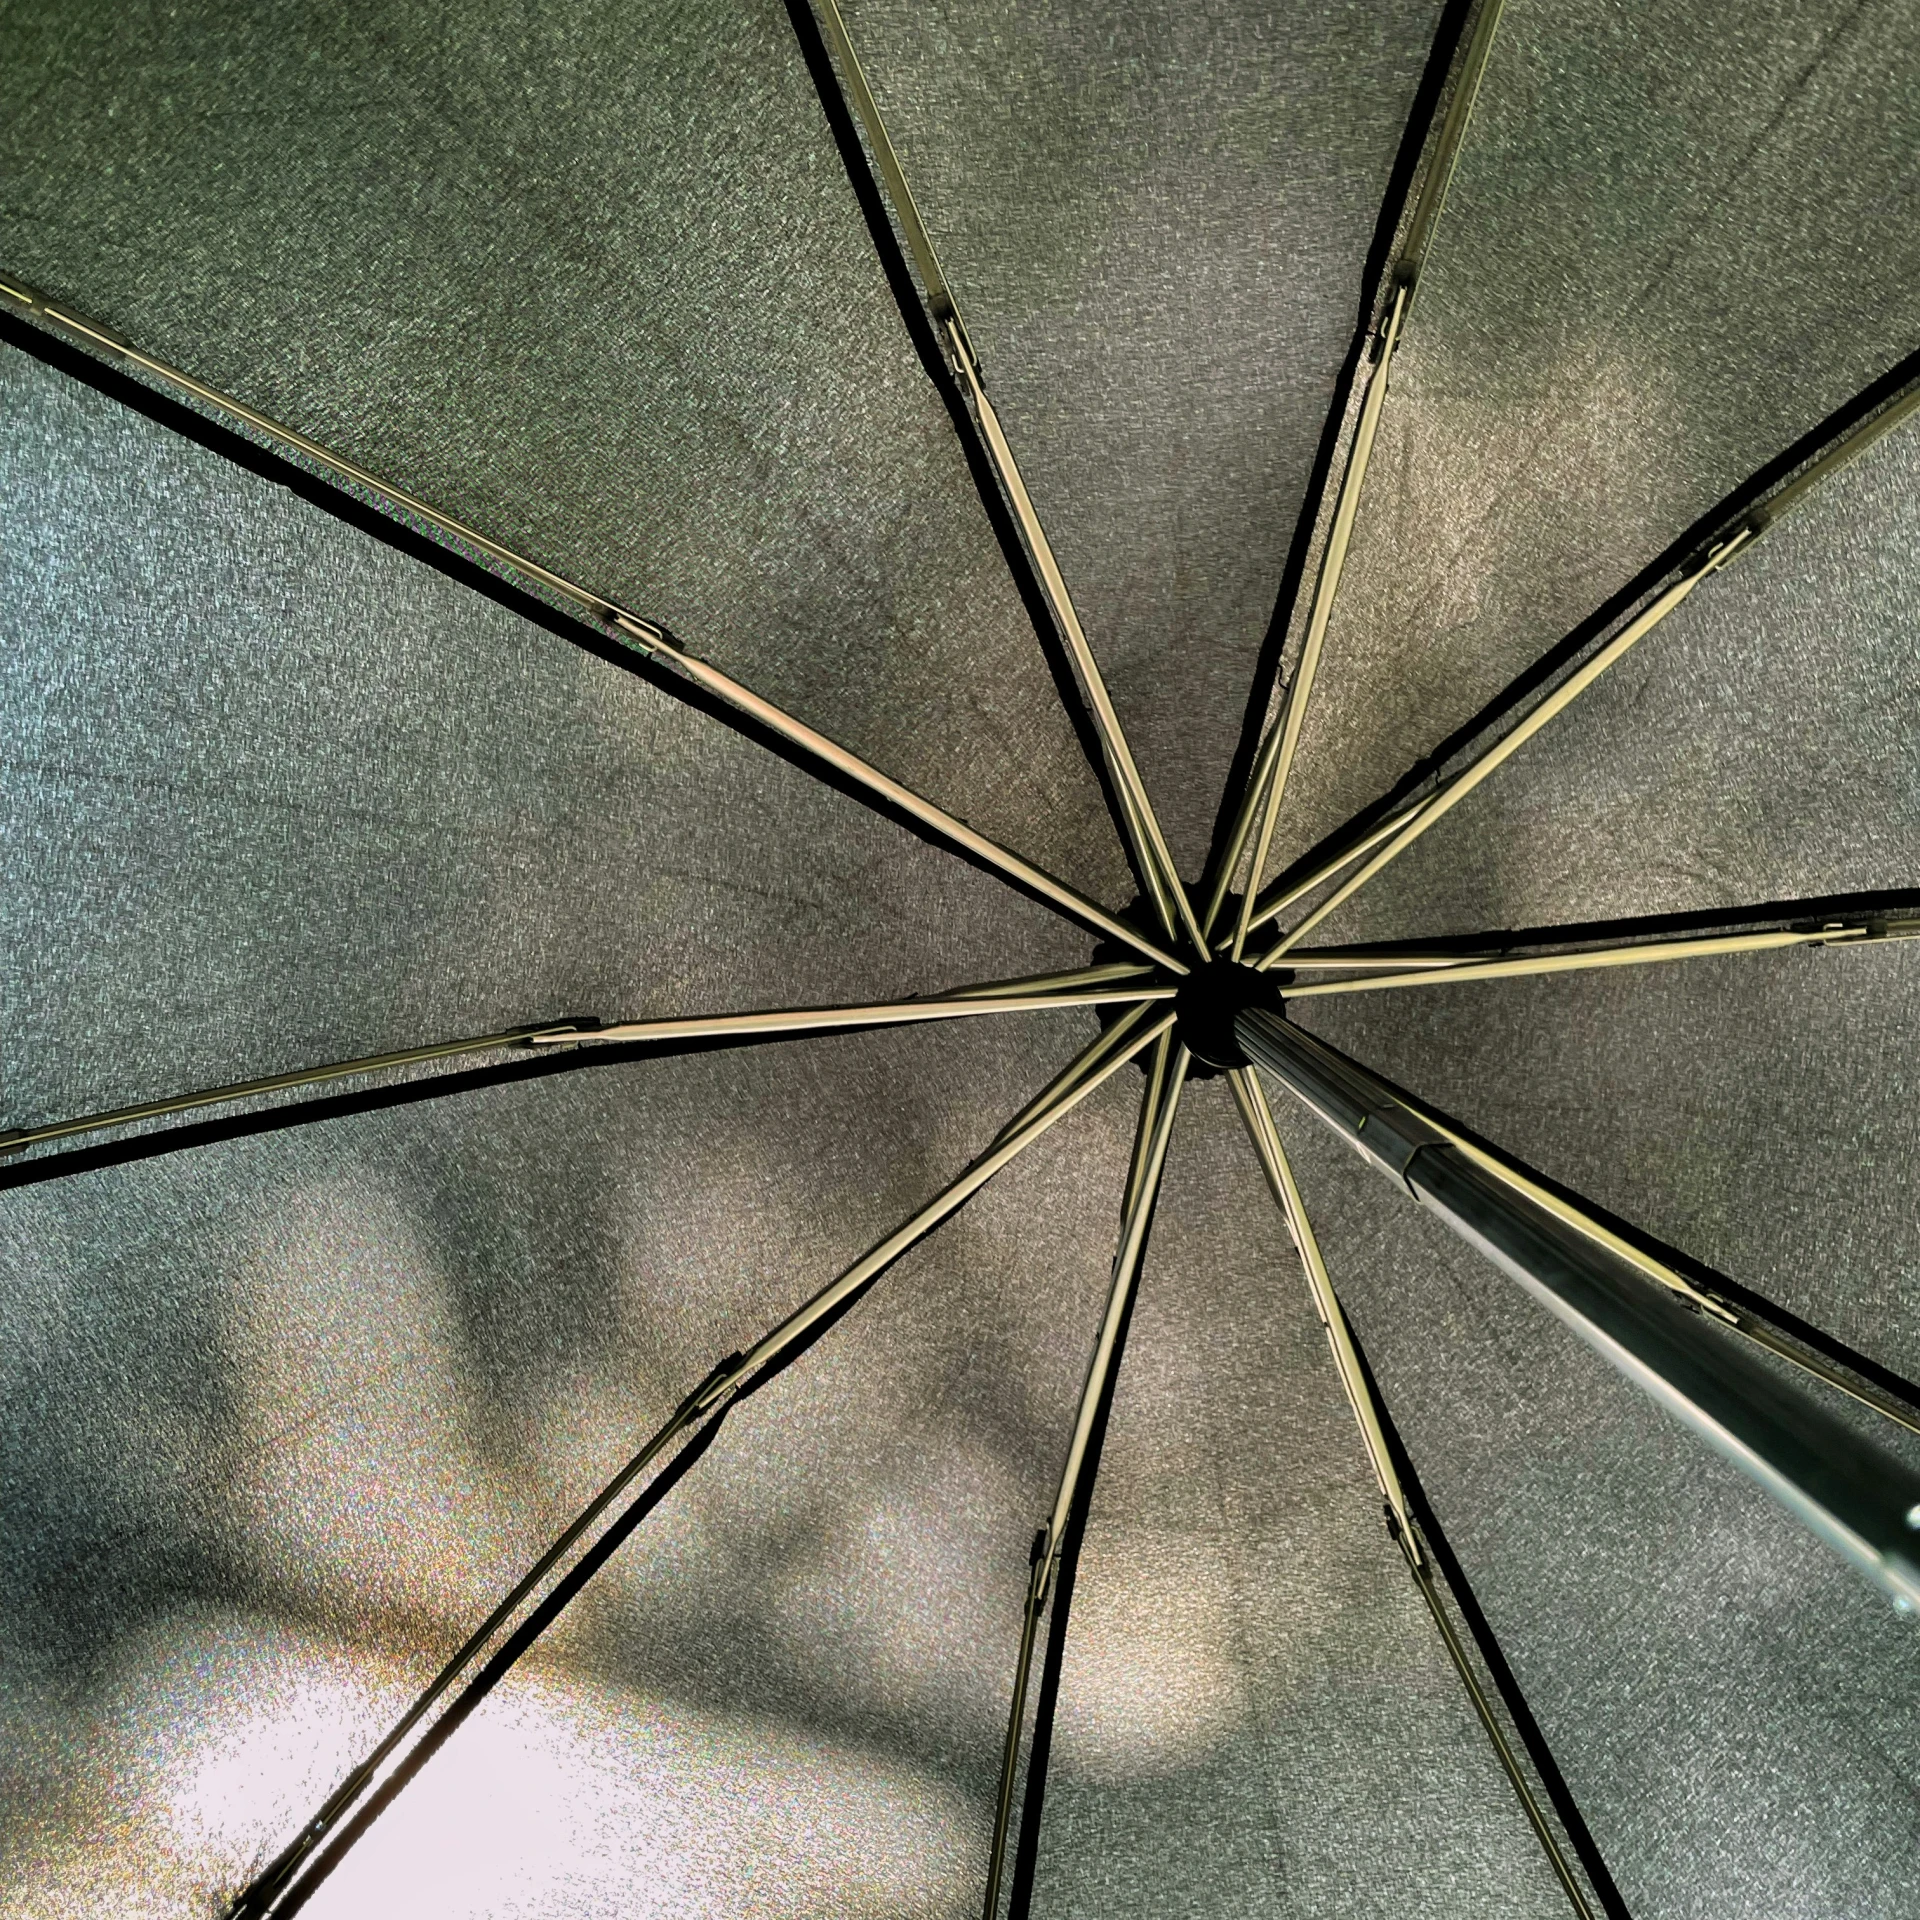 an umbrella view of its inside and outside